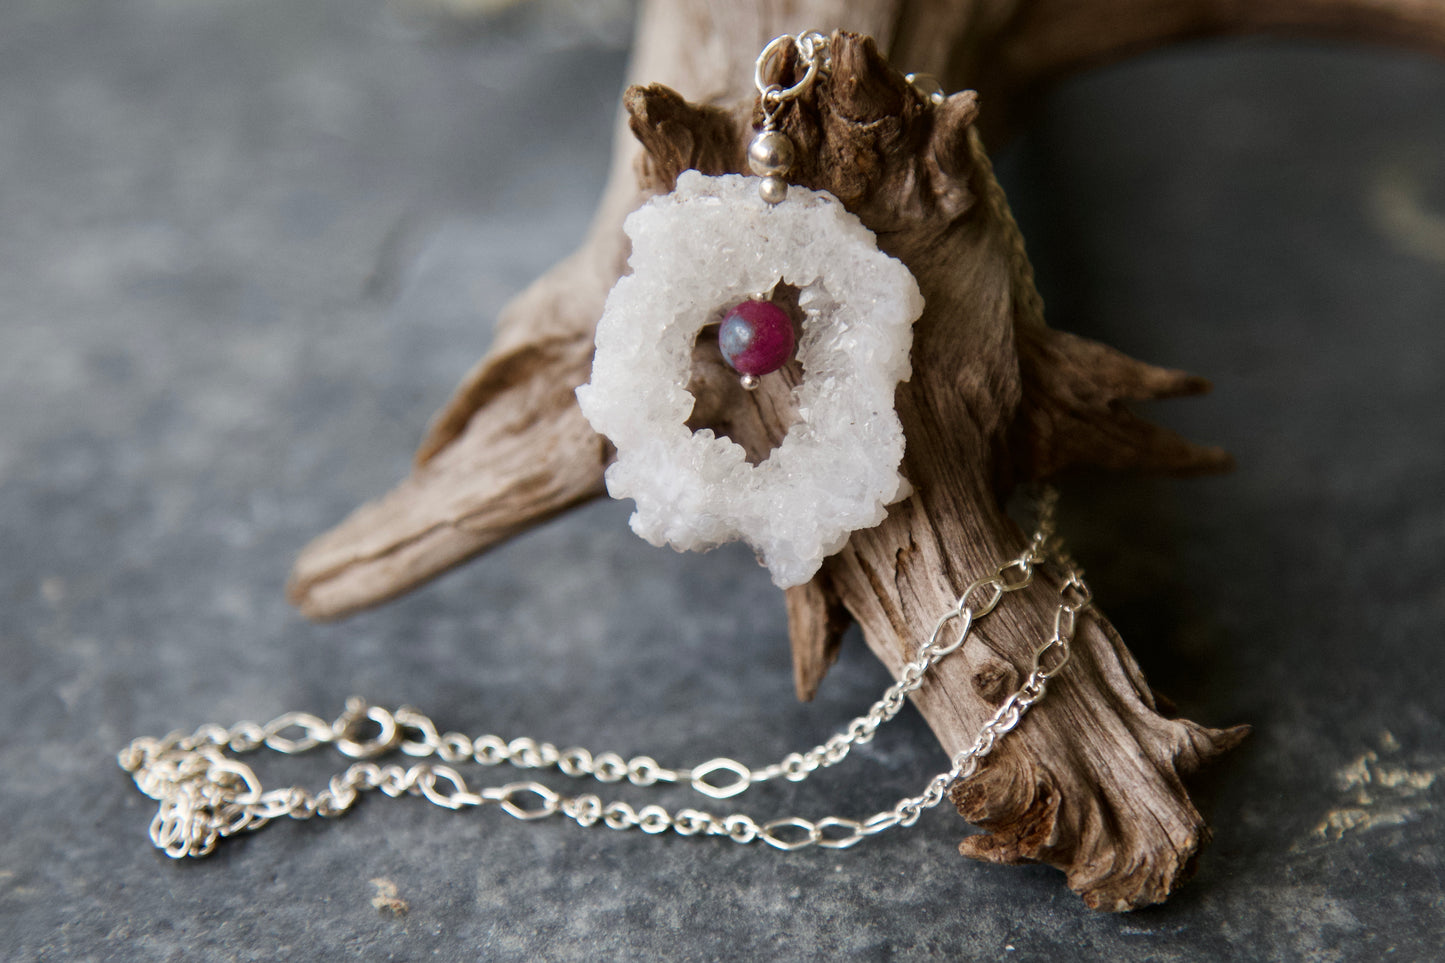 Clear Quartz Crystal Geode Slice, Ruby and Kyanite, and Sterling Silver Pendant Necklace